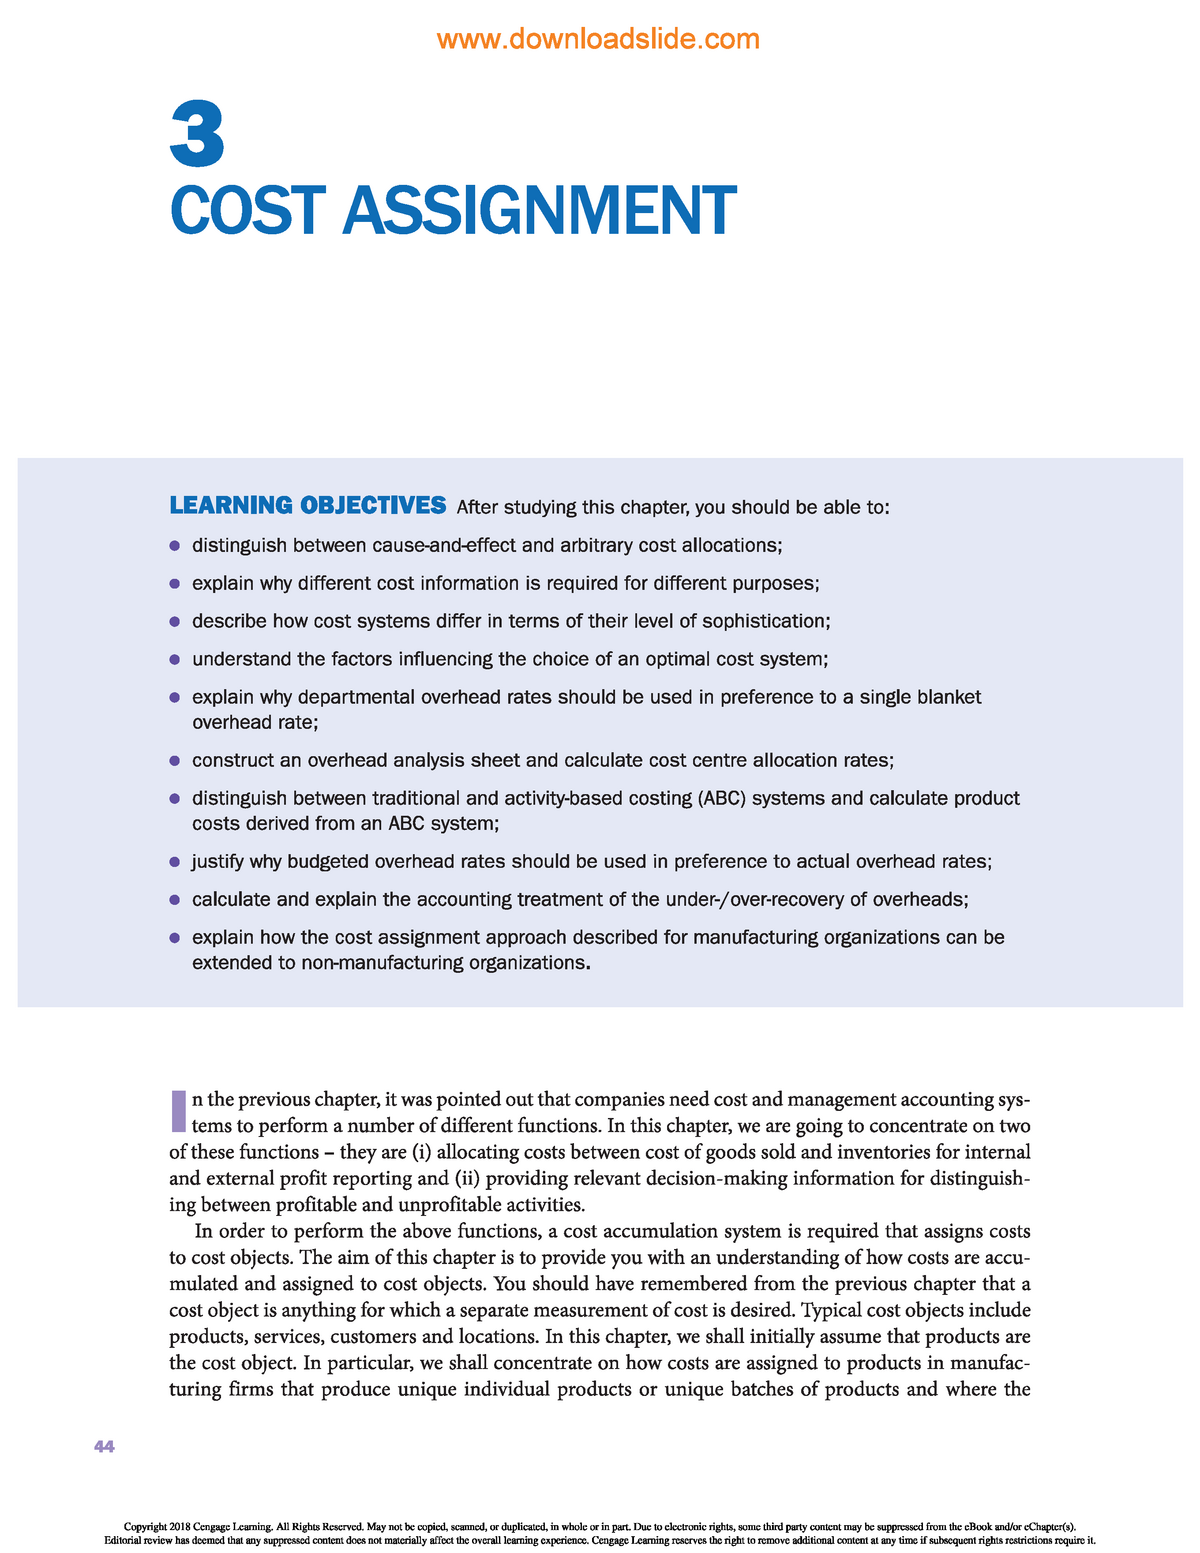 cost assignment in